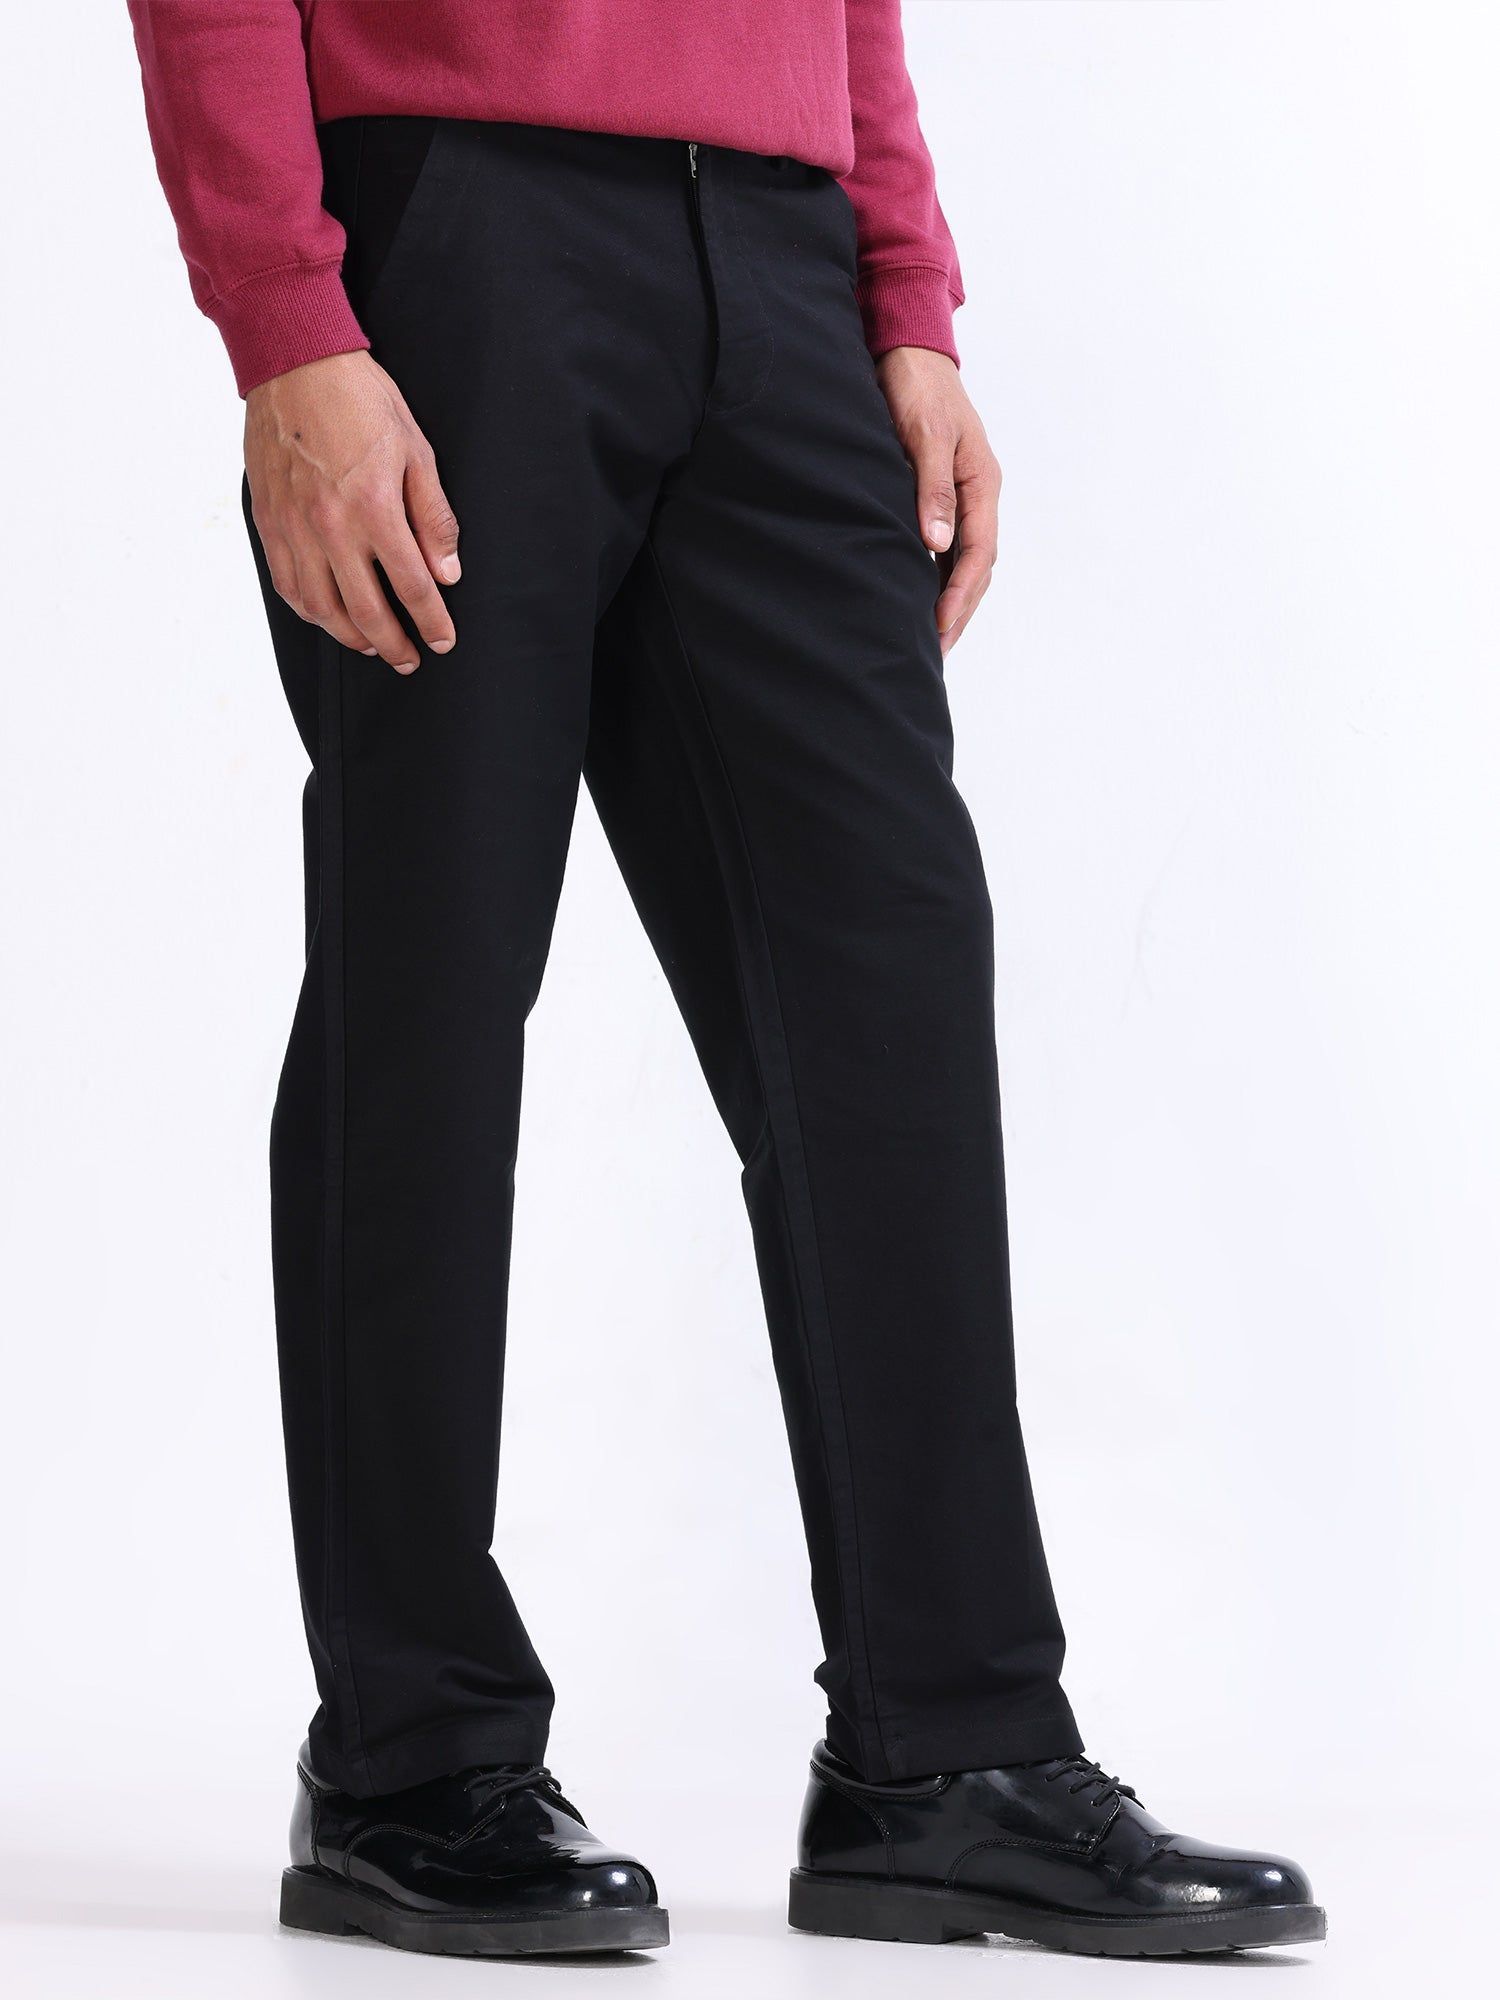 Soft Modal Black Relaxed Pant